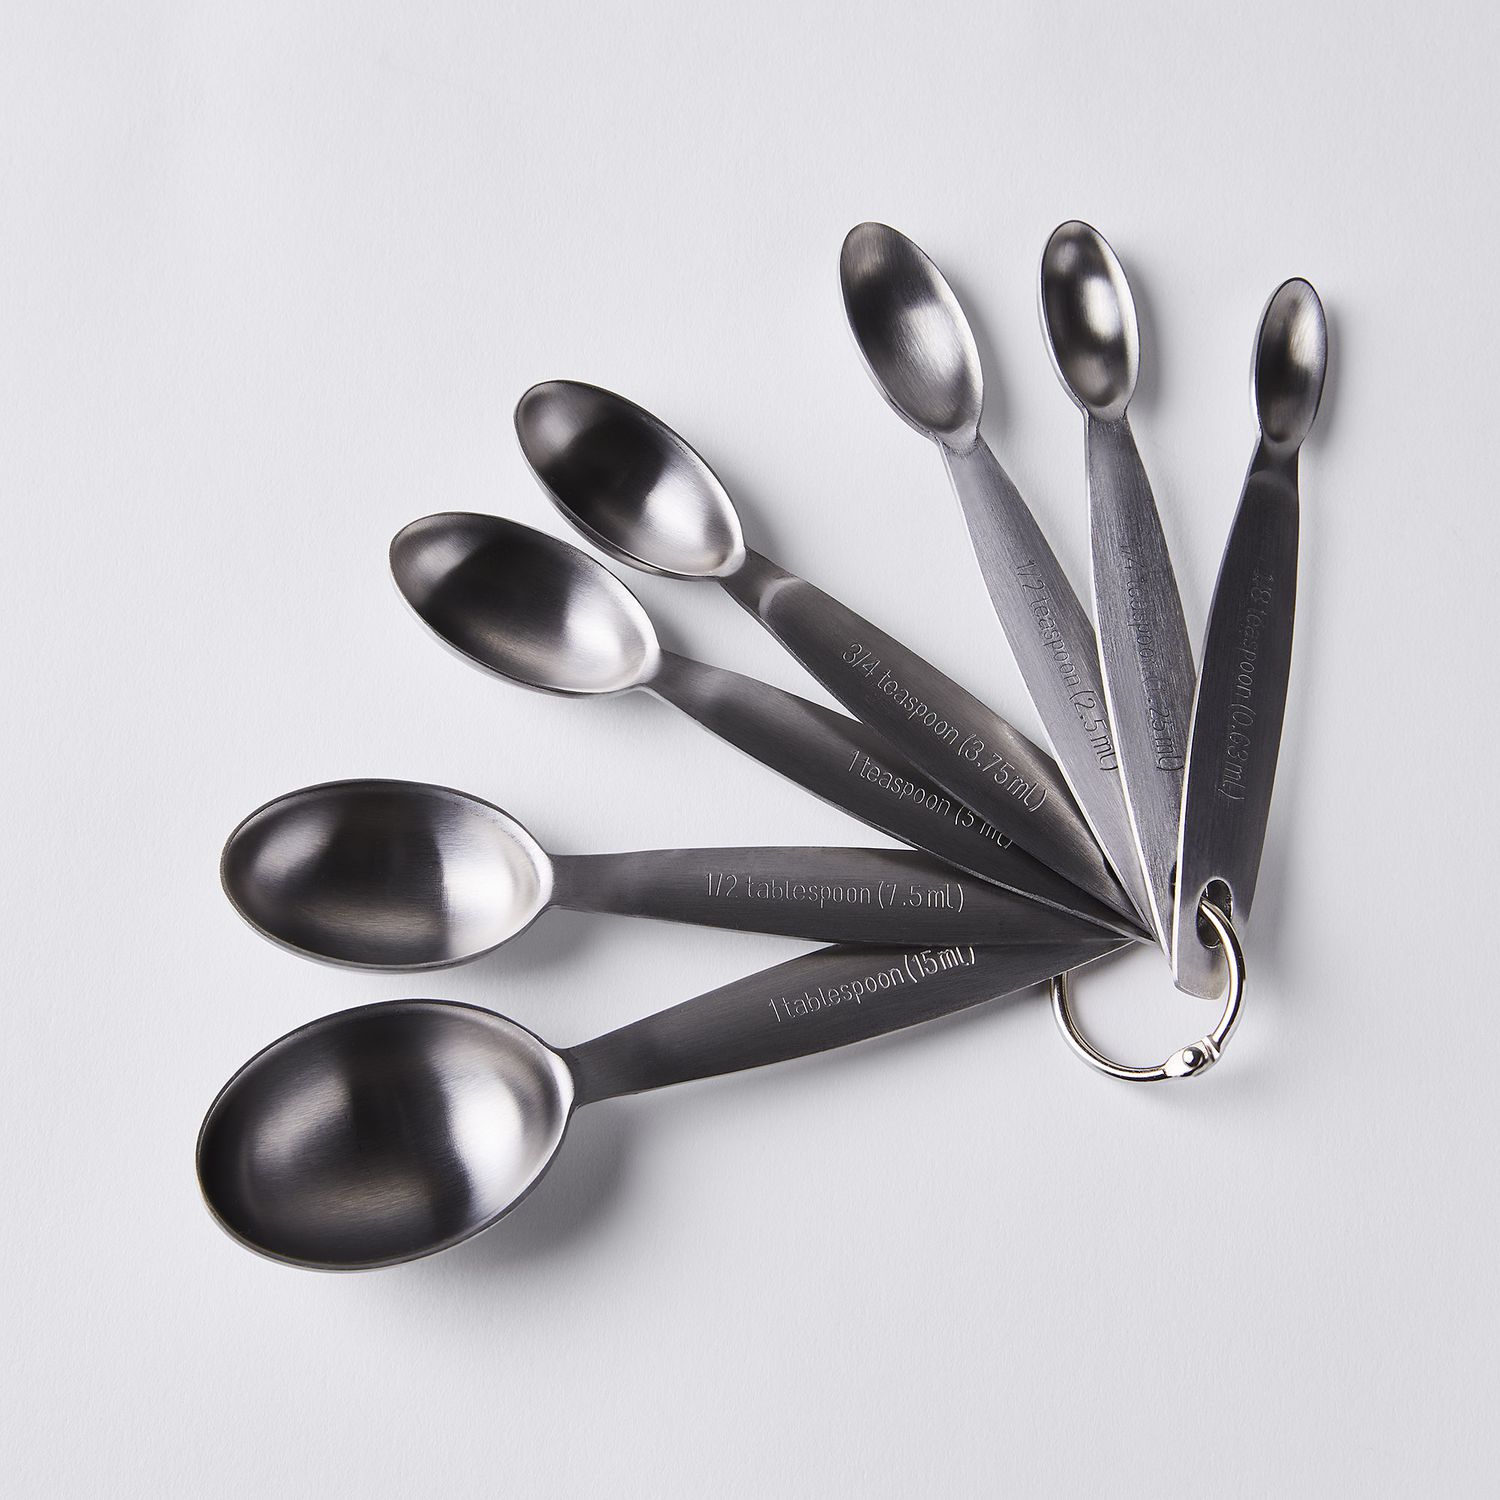 Oval Deluxe Measuring Spoon 4 pcs set stainless steel